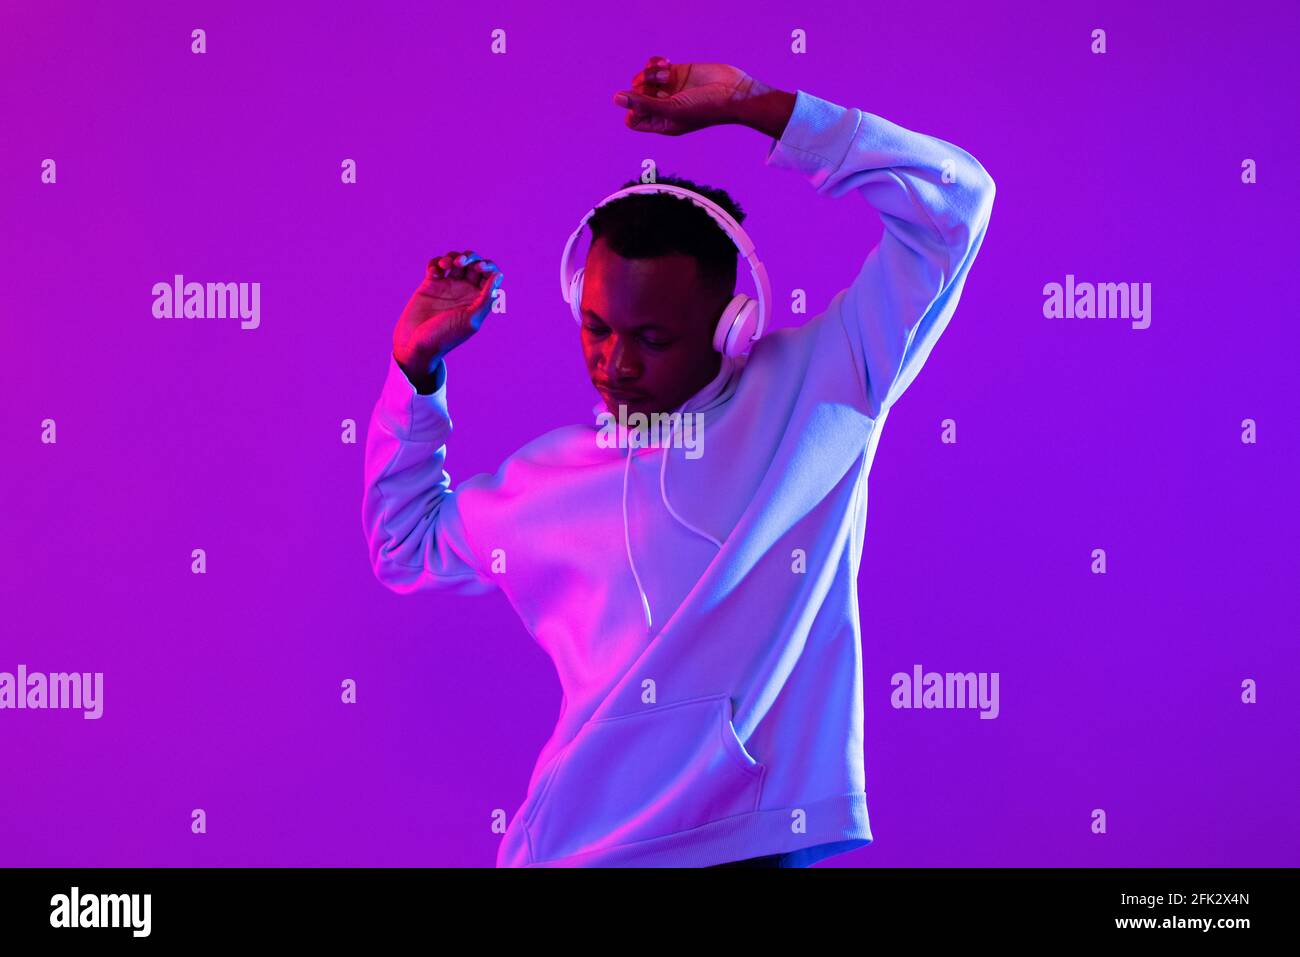 Young handsome African man wearing headphones listening to music and dancing in futuristic purple cyberpunk neon light background Stock Photo